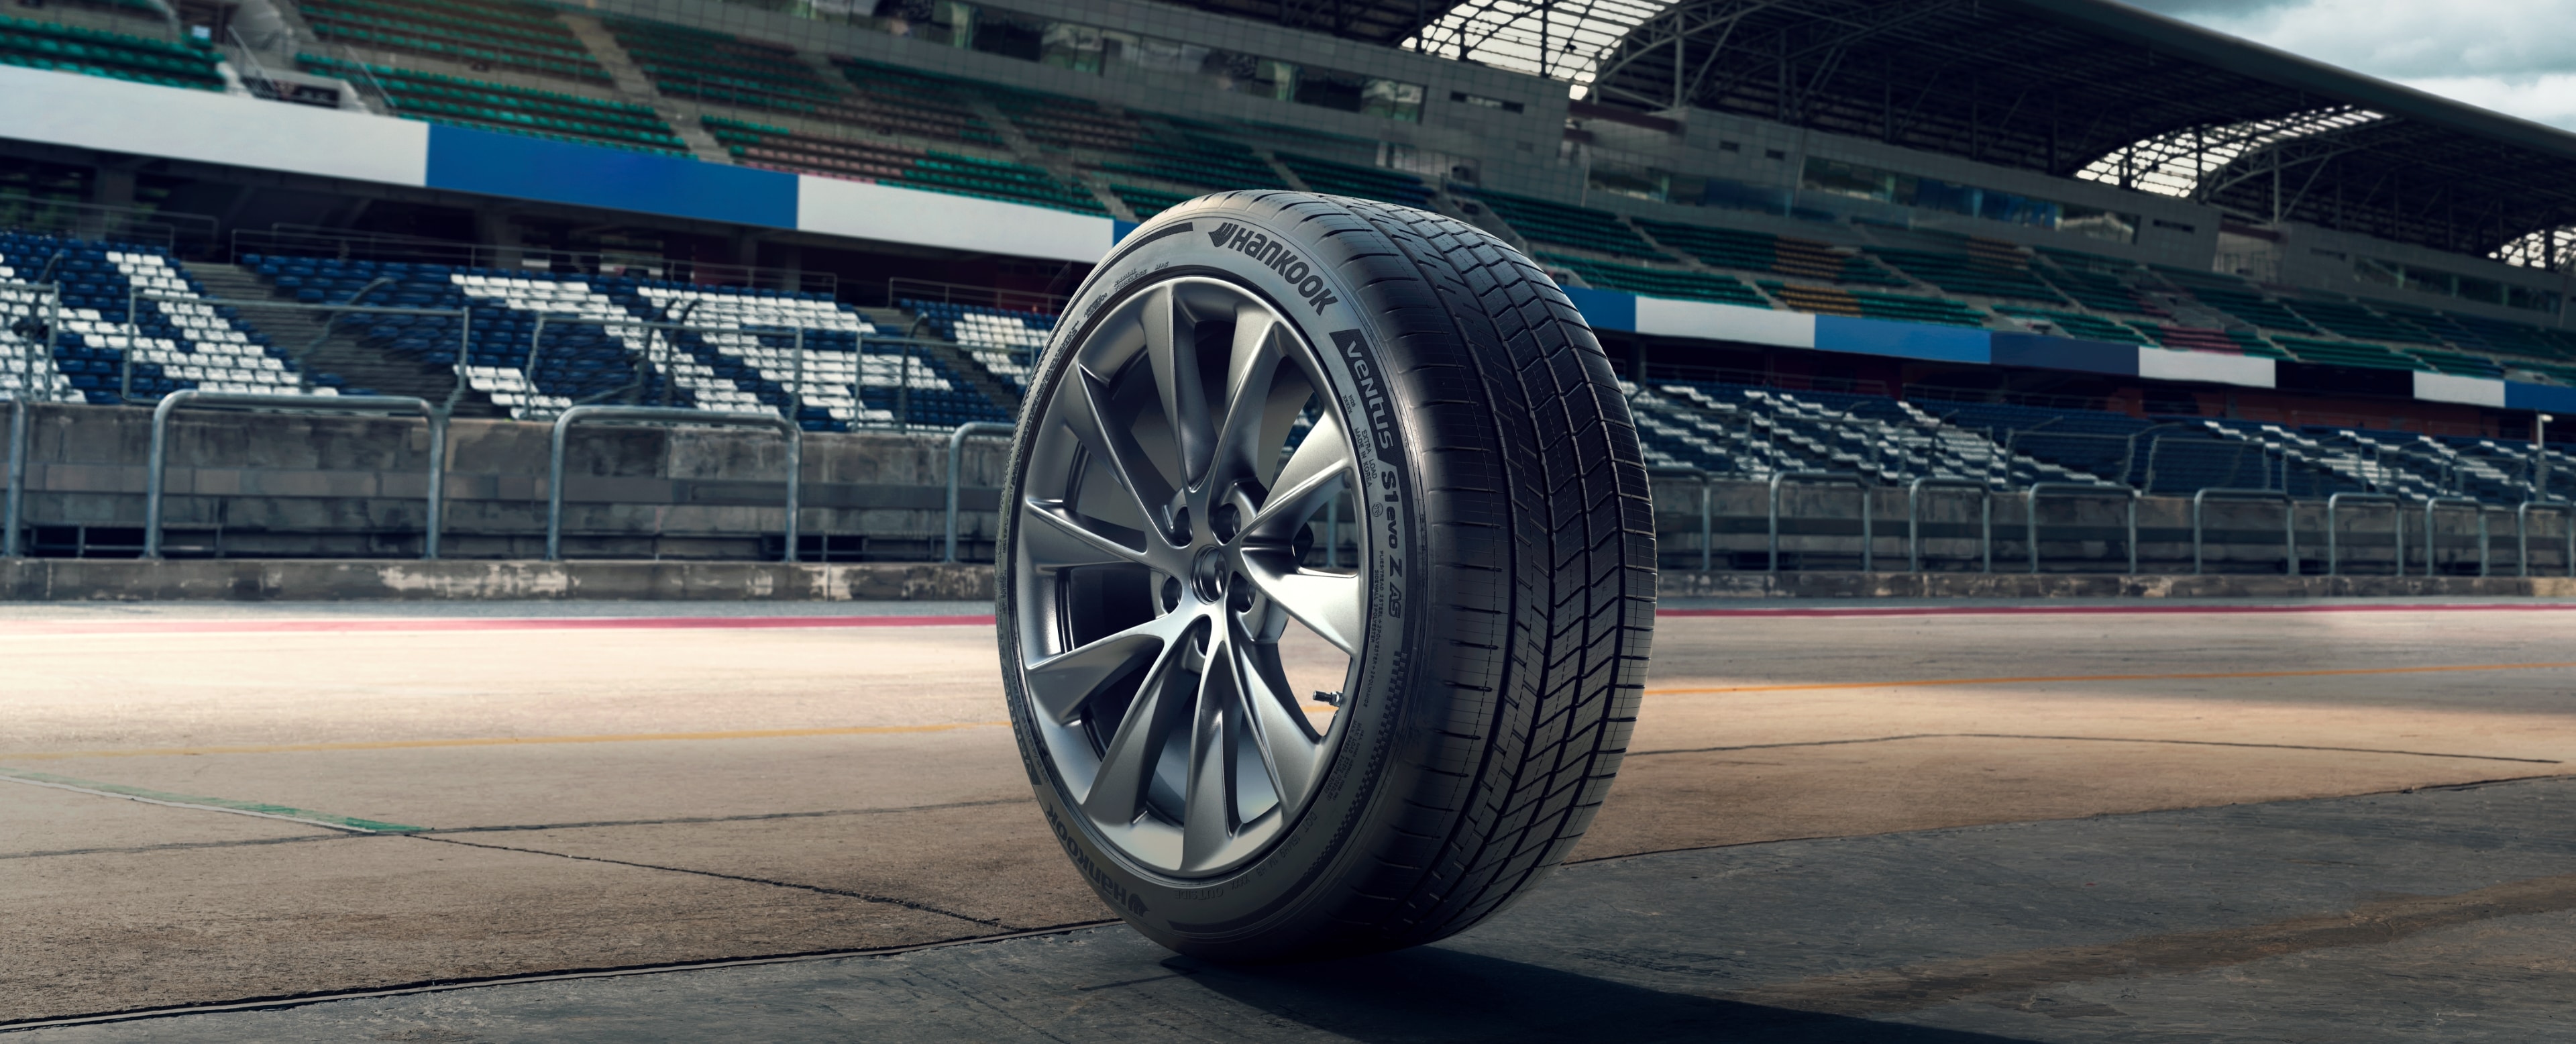 Hankook Tire & Technology-Tires-h129a